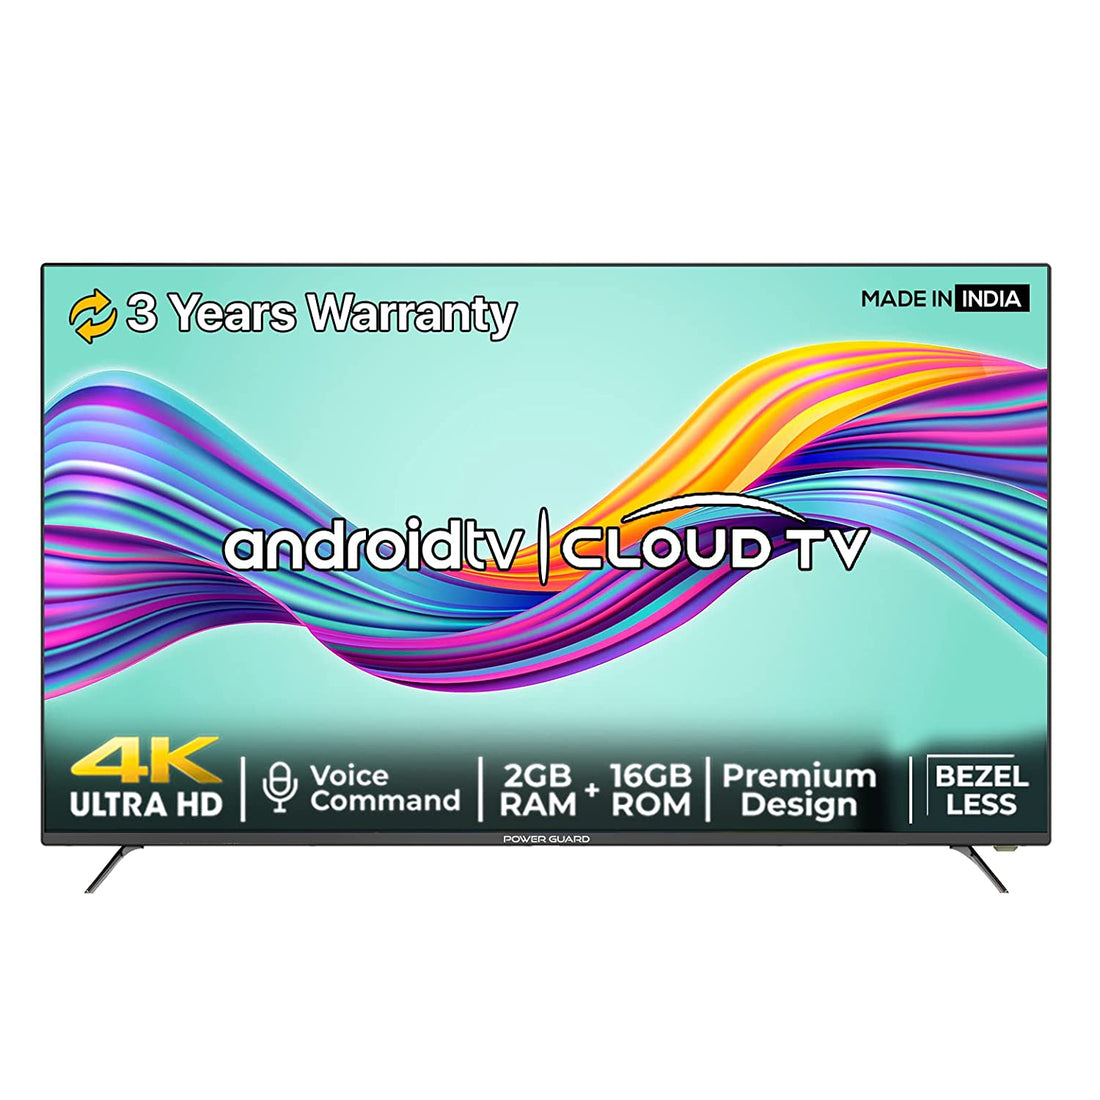 Best 4K 65 inch TV Price in India - Compare and Save